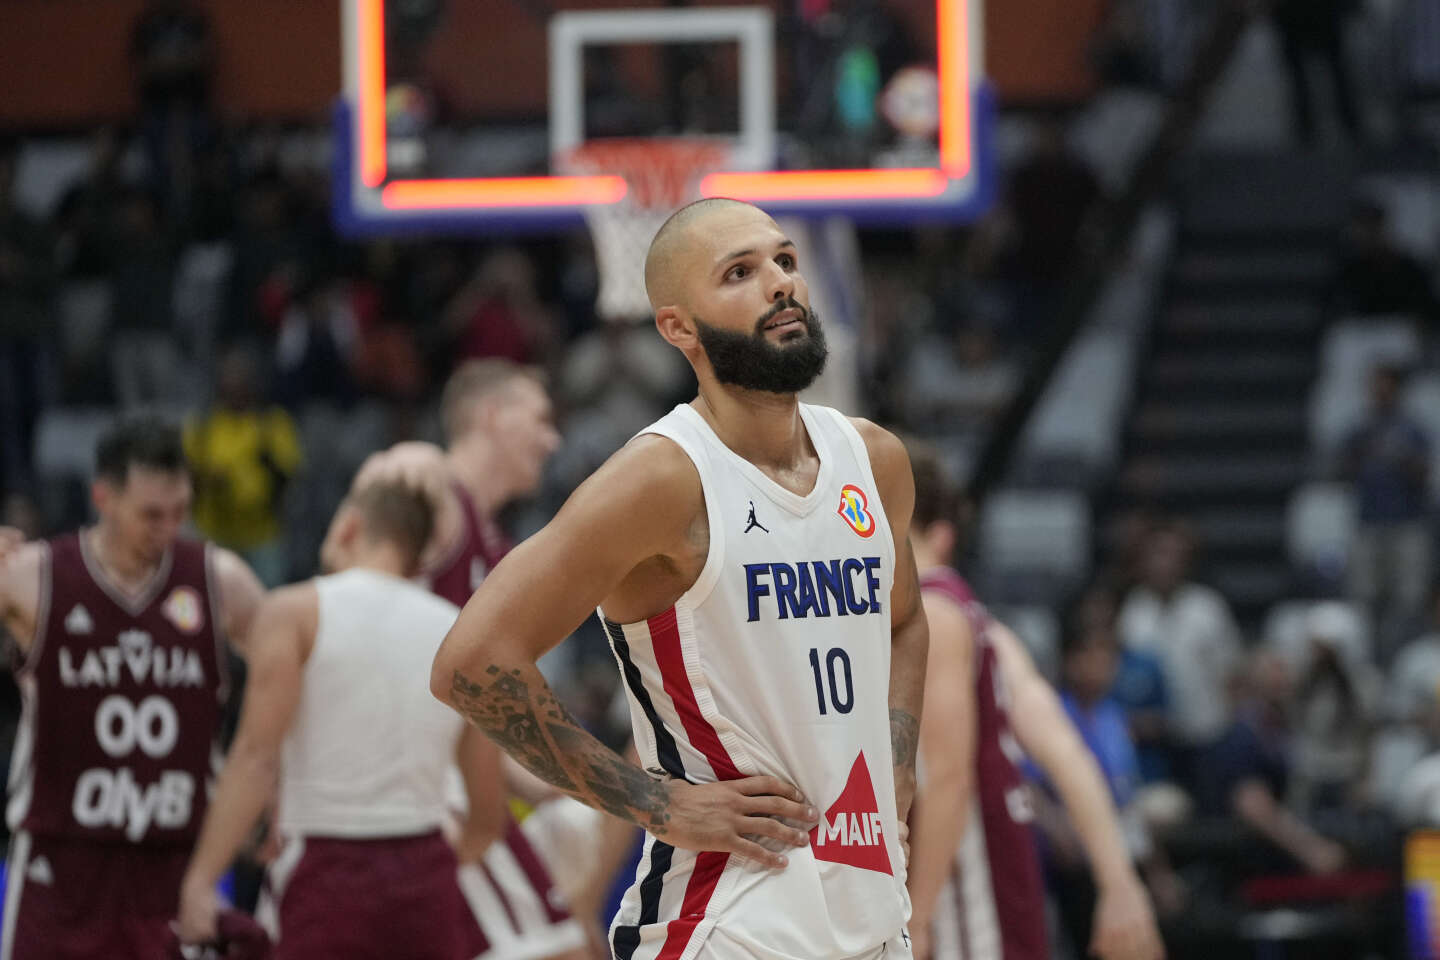 Basketball World Cup France disappointing, just one year ahead of Paris Olympics